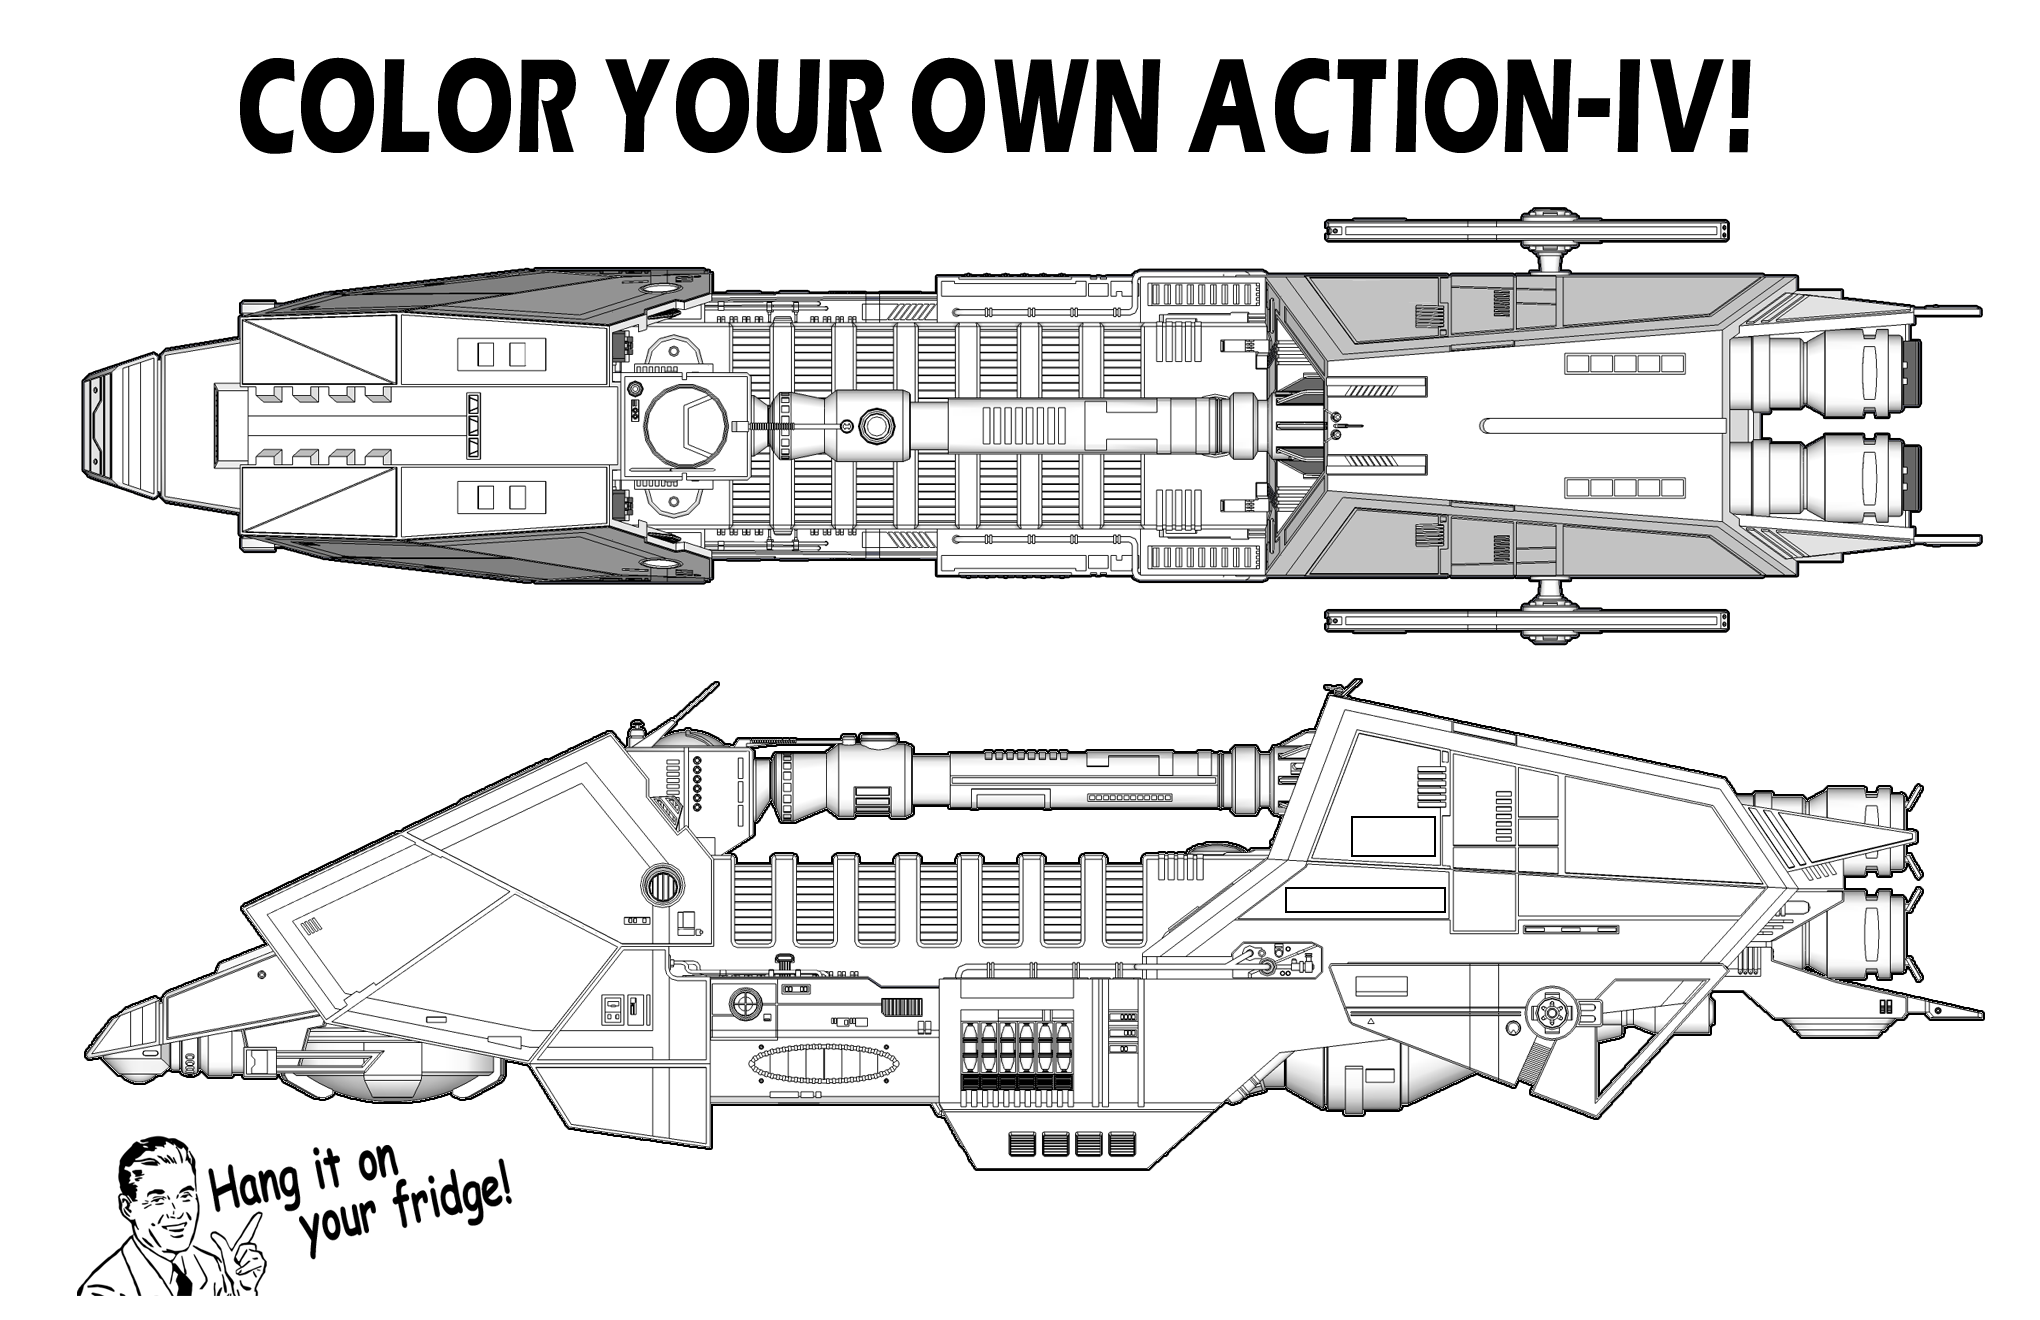 Color Your Own Action-IV